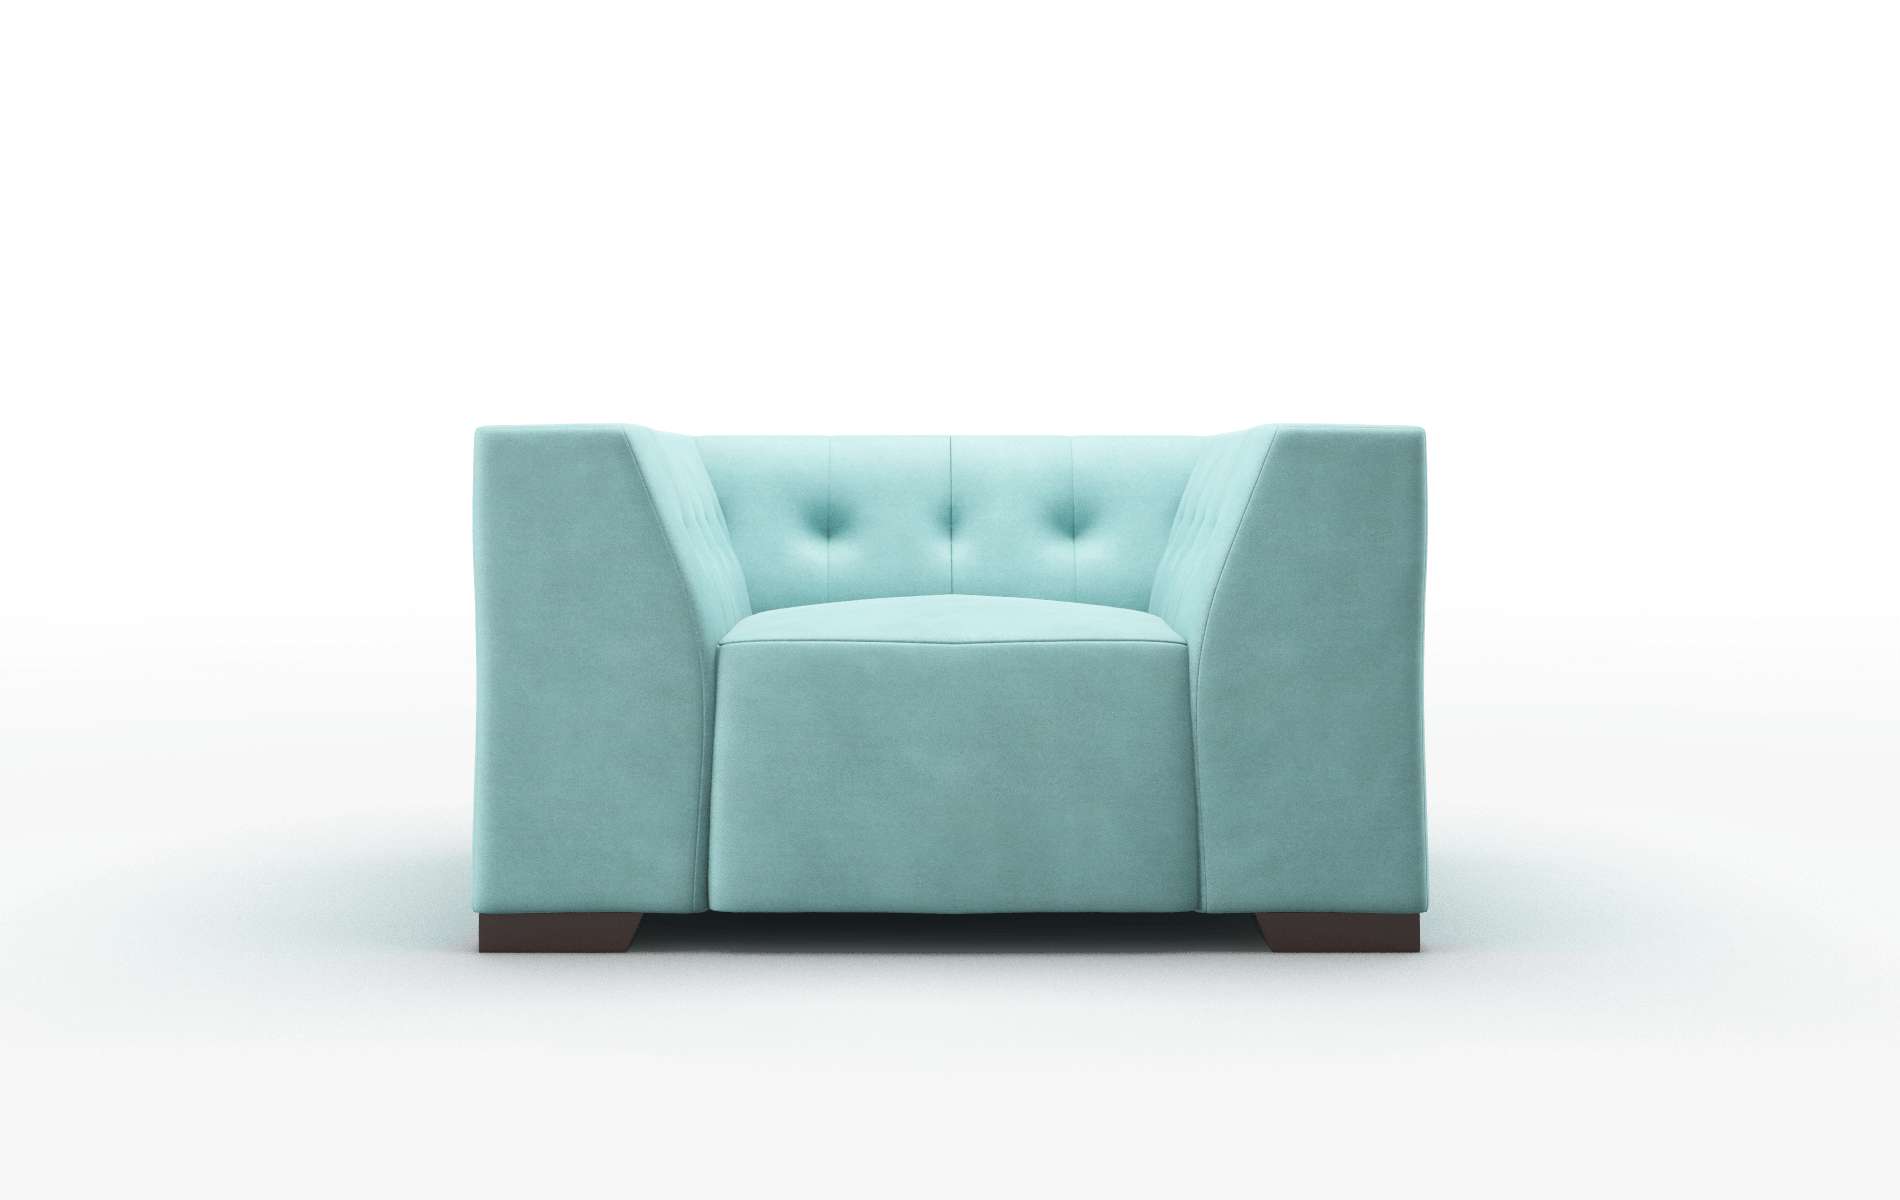 Palermo Curious Turquoise Chair espresso legs 1